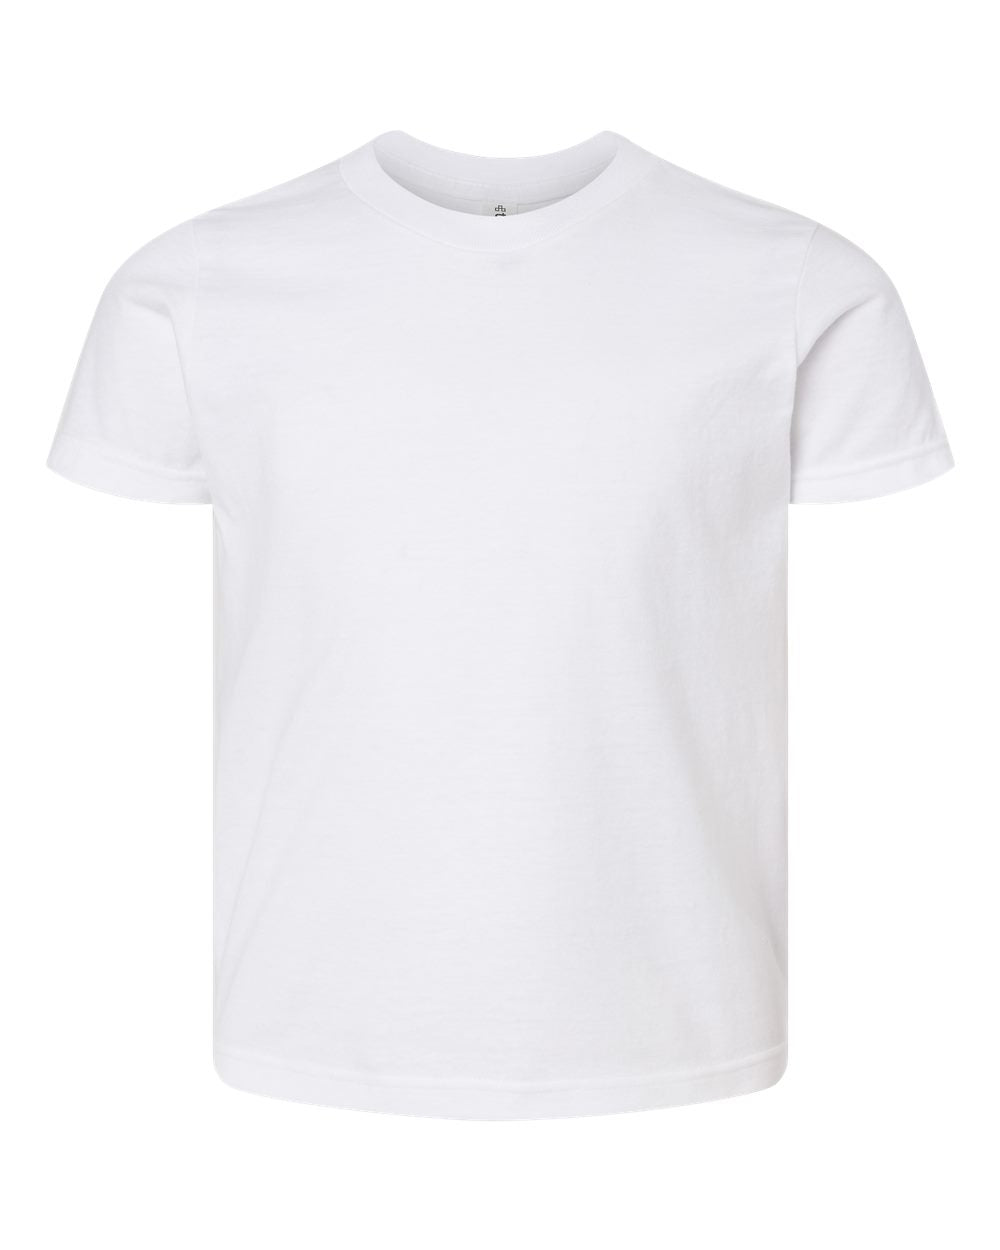 Tultex Youth Tee (235) in White